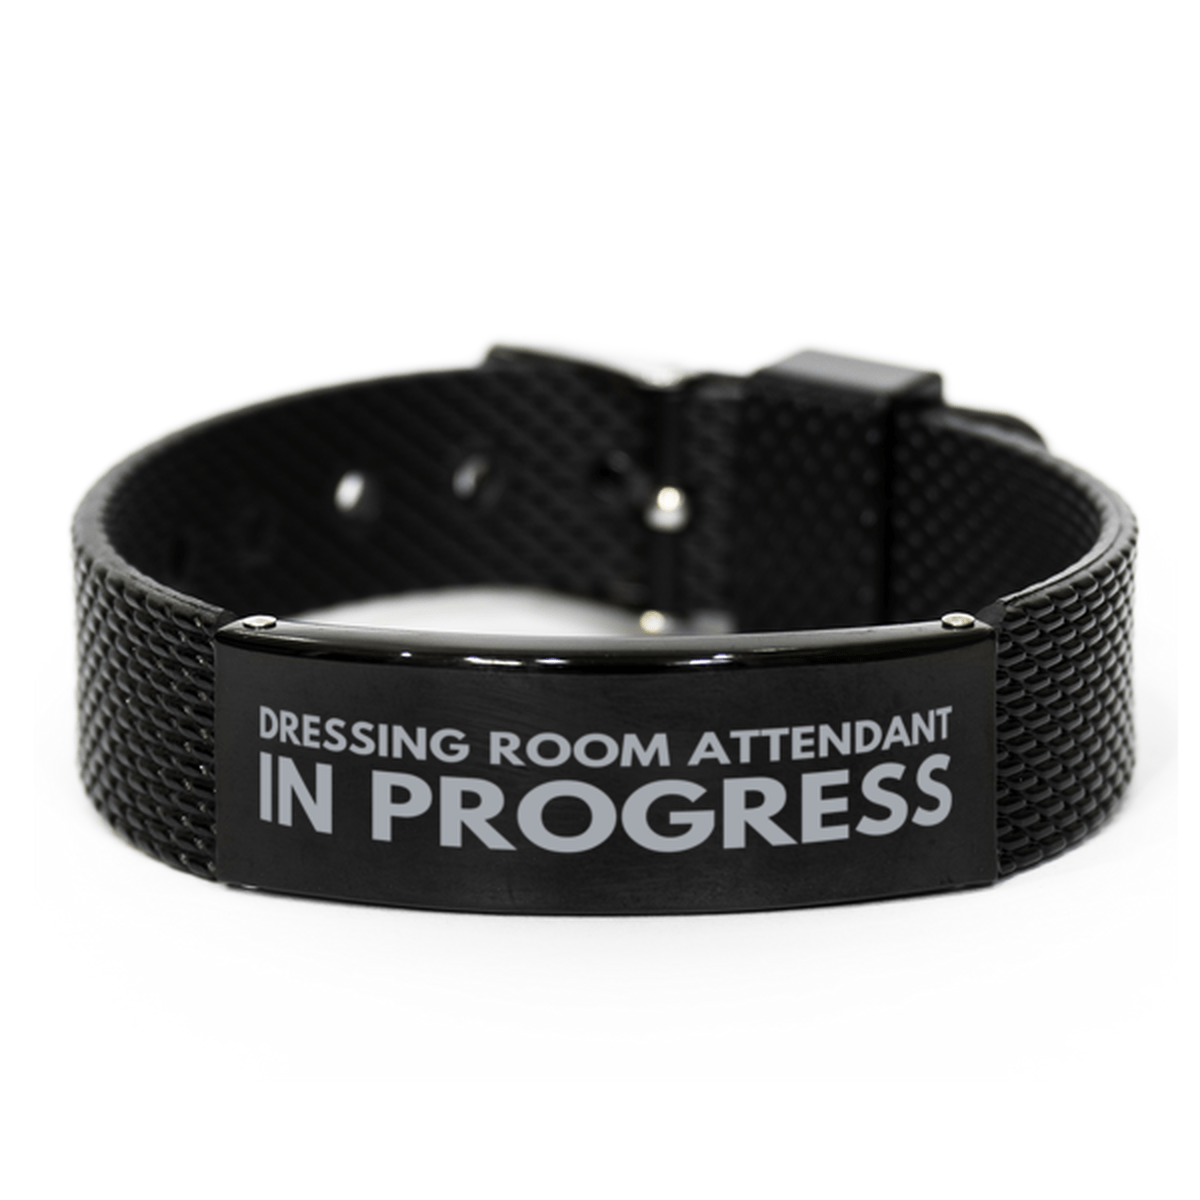 Inspirational Dressing Room Attendant Black Shark Mesh Bracelet, Dressing Room Attendant In Progress, Best Graduation Gifts for Students